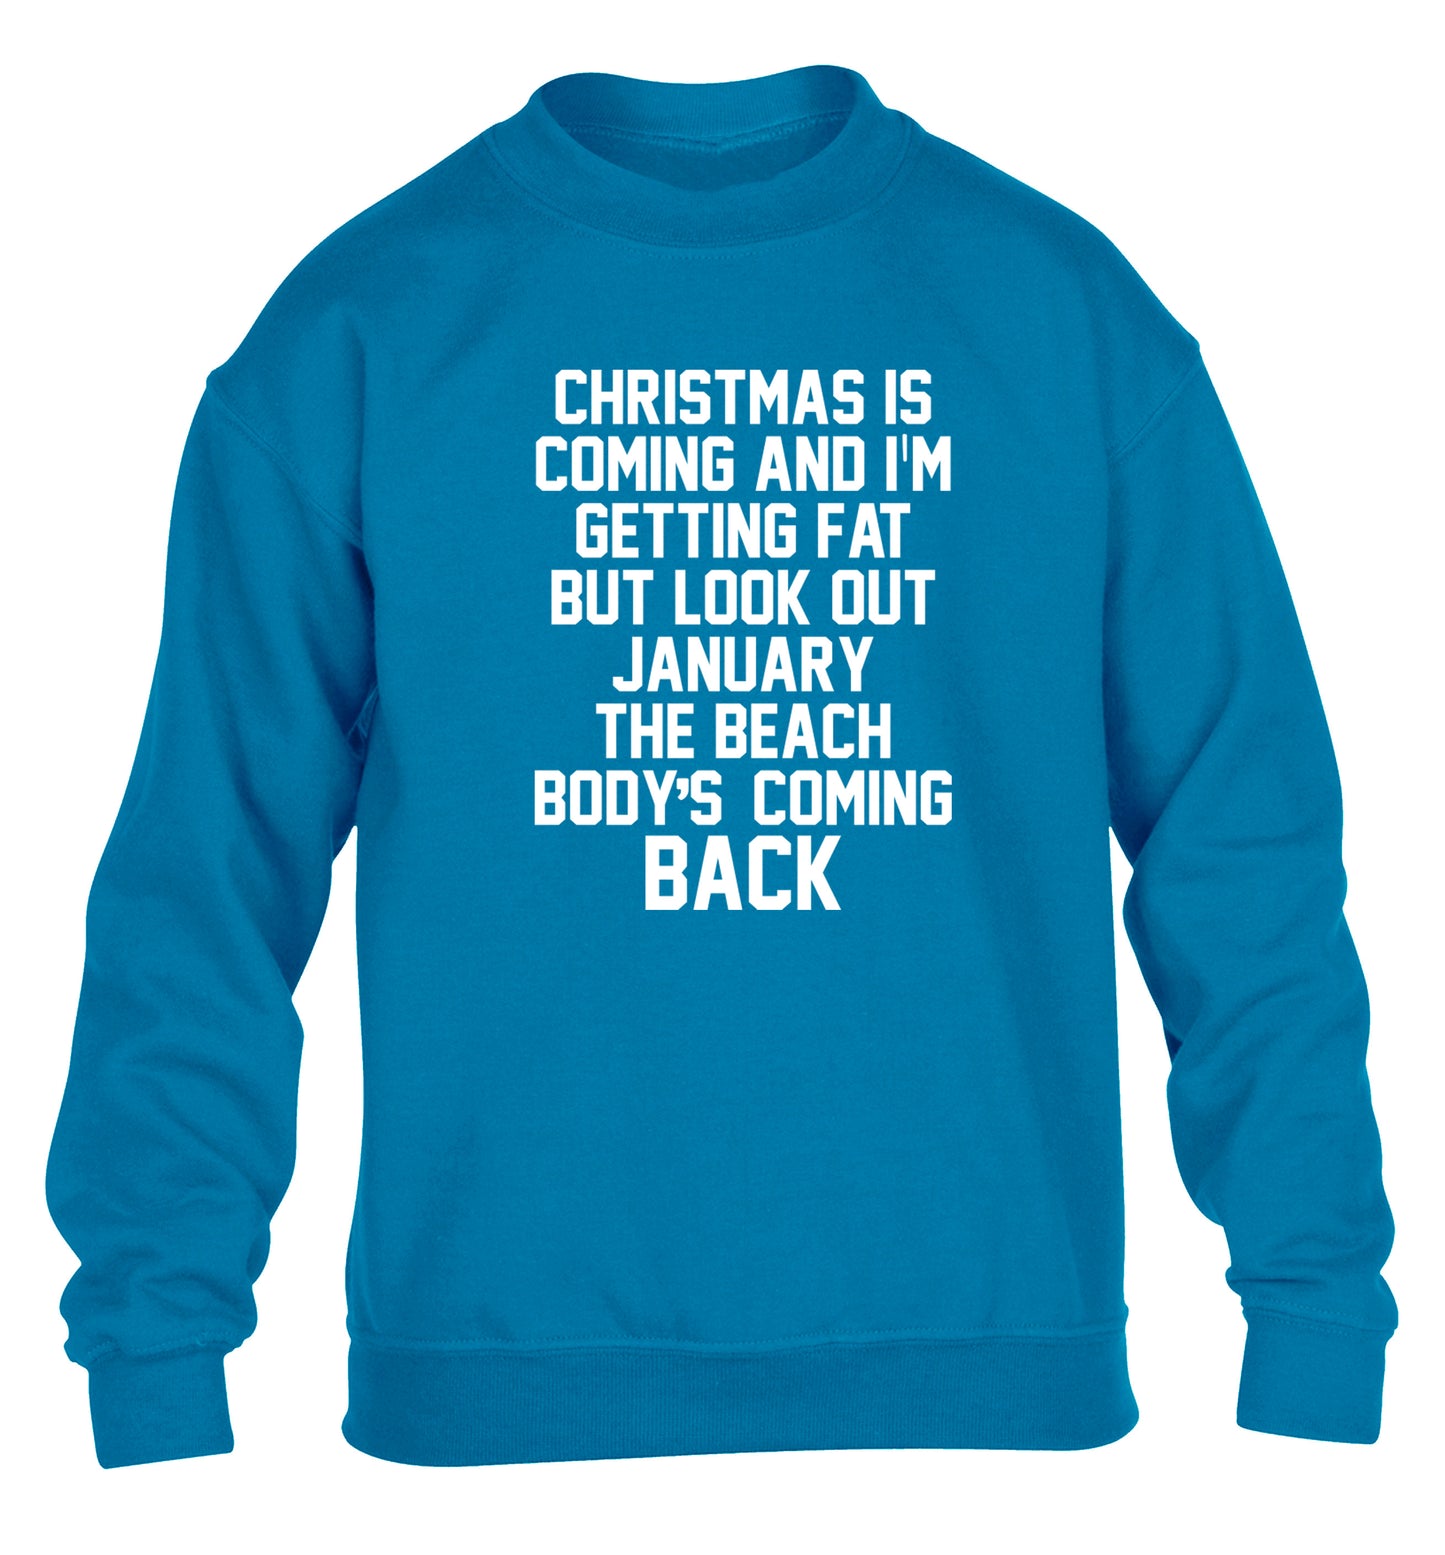 Christmas is coming and I'm getting fat but look out January the beach body's coming back! children's blue sweater 12-14 Years